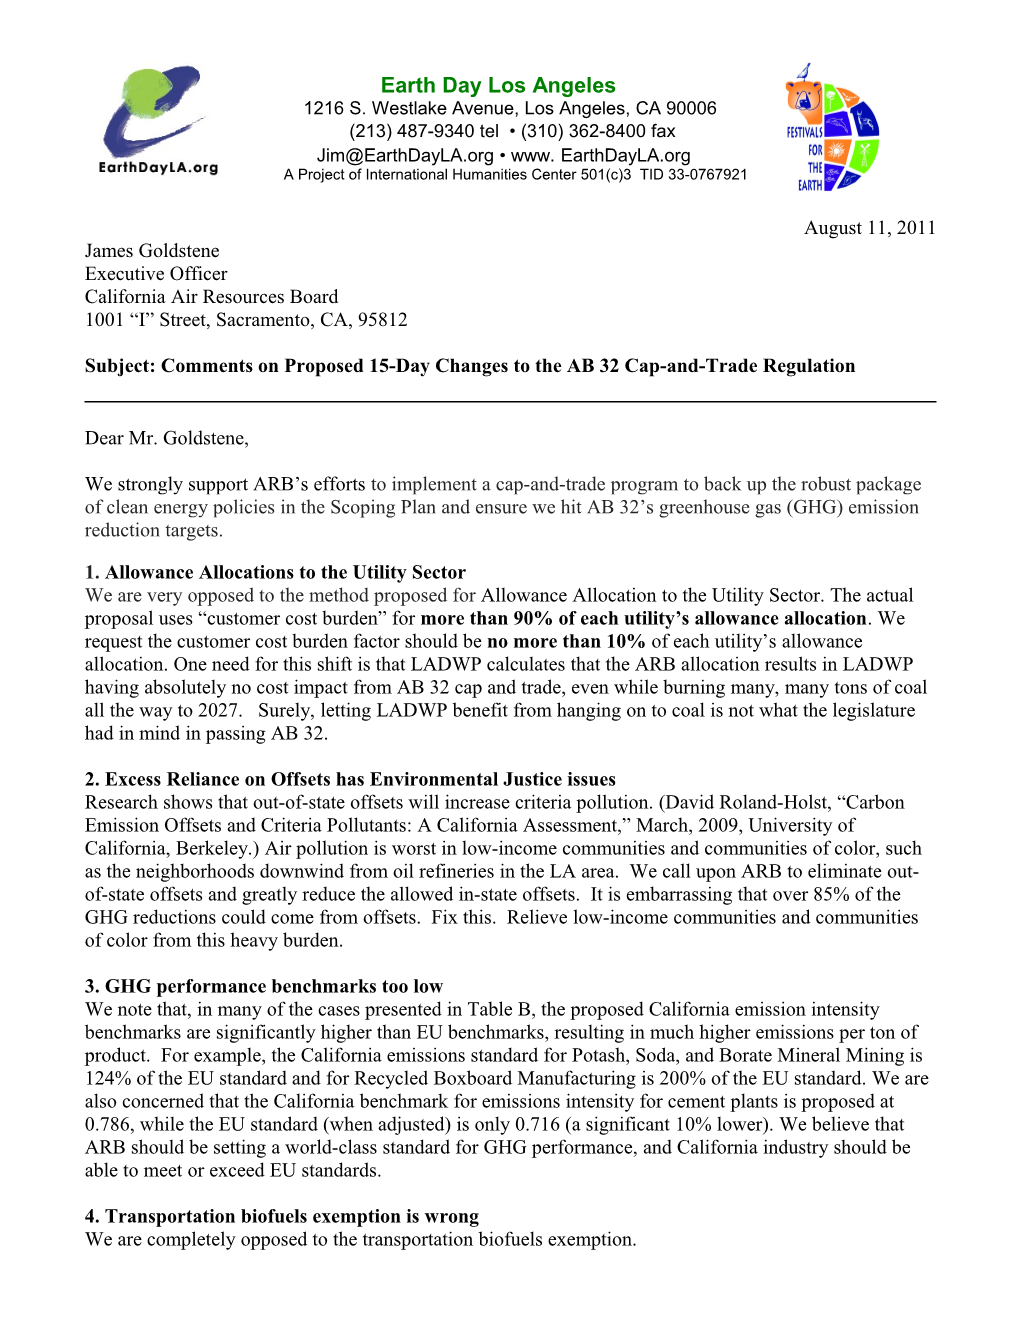 Subject: Comments on Proposed 15-Day Changes to the AB 32 Cap-And-Trade Regulation